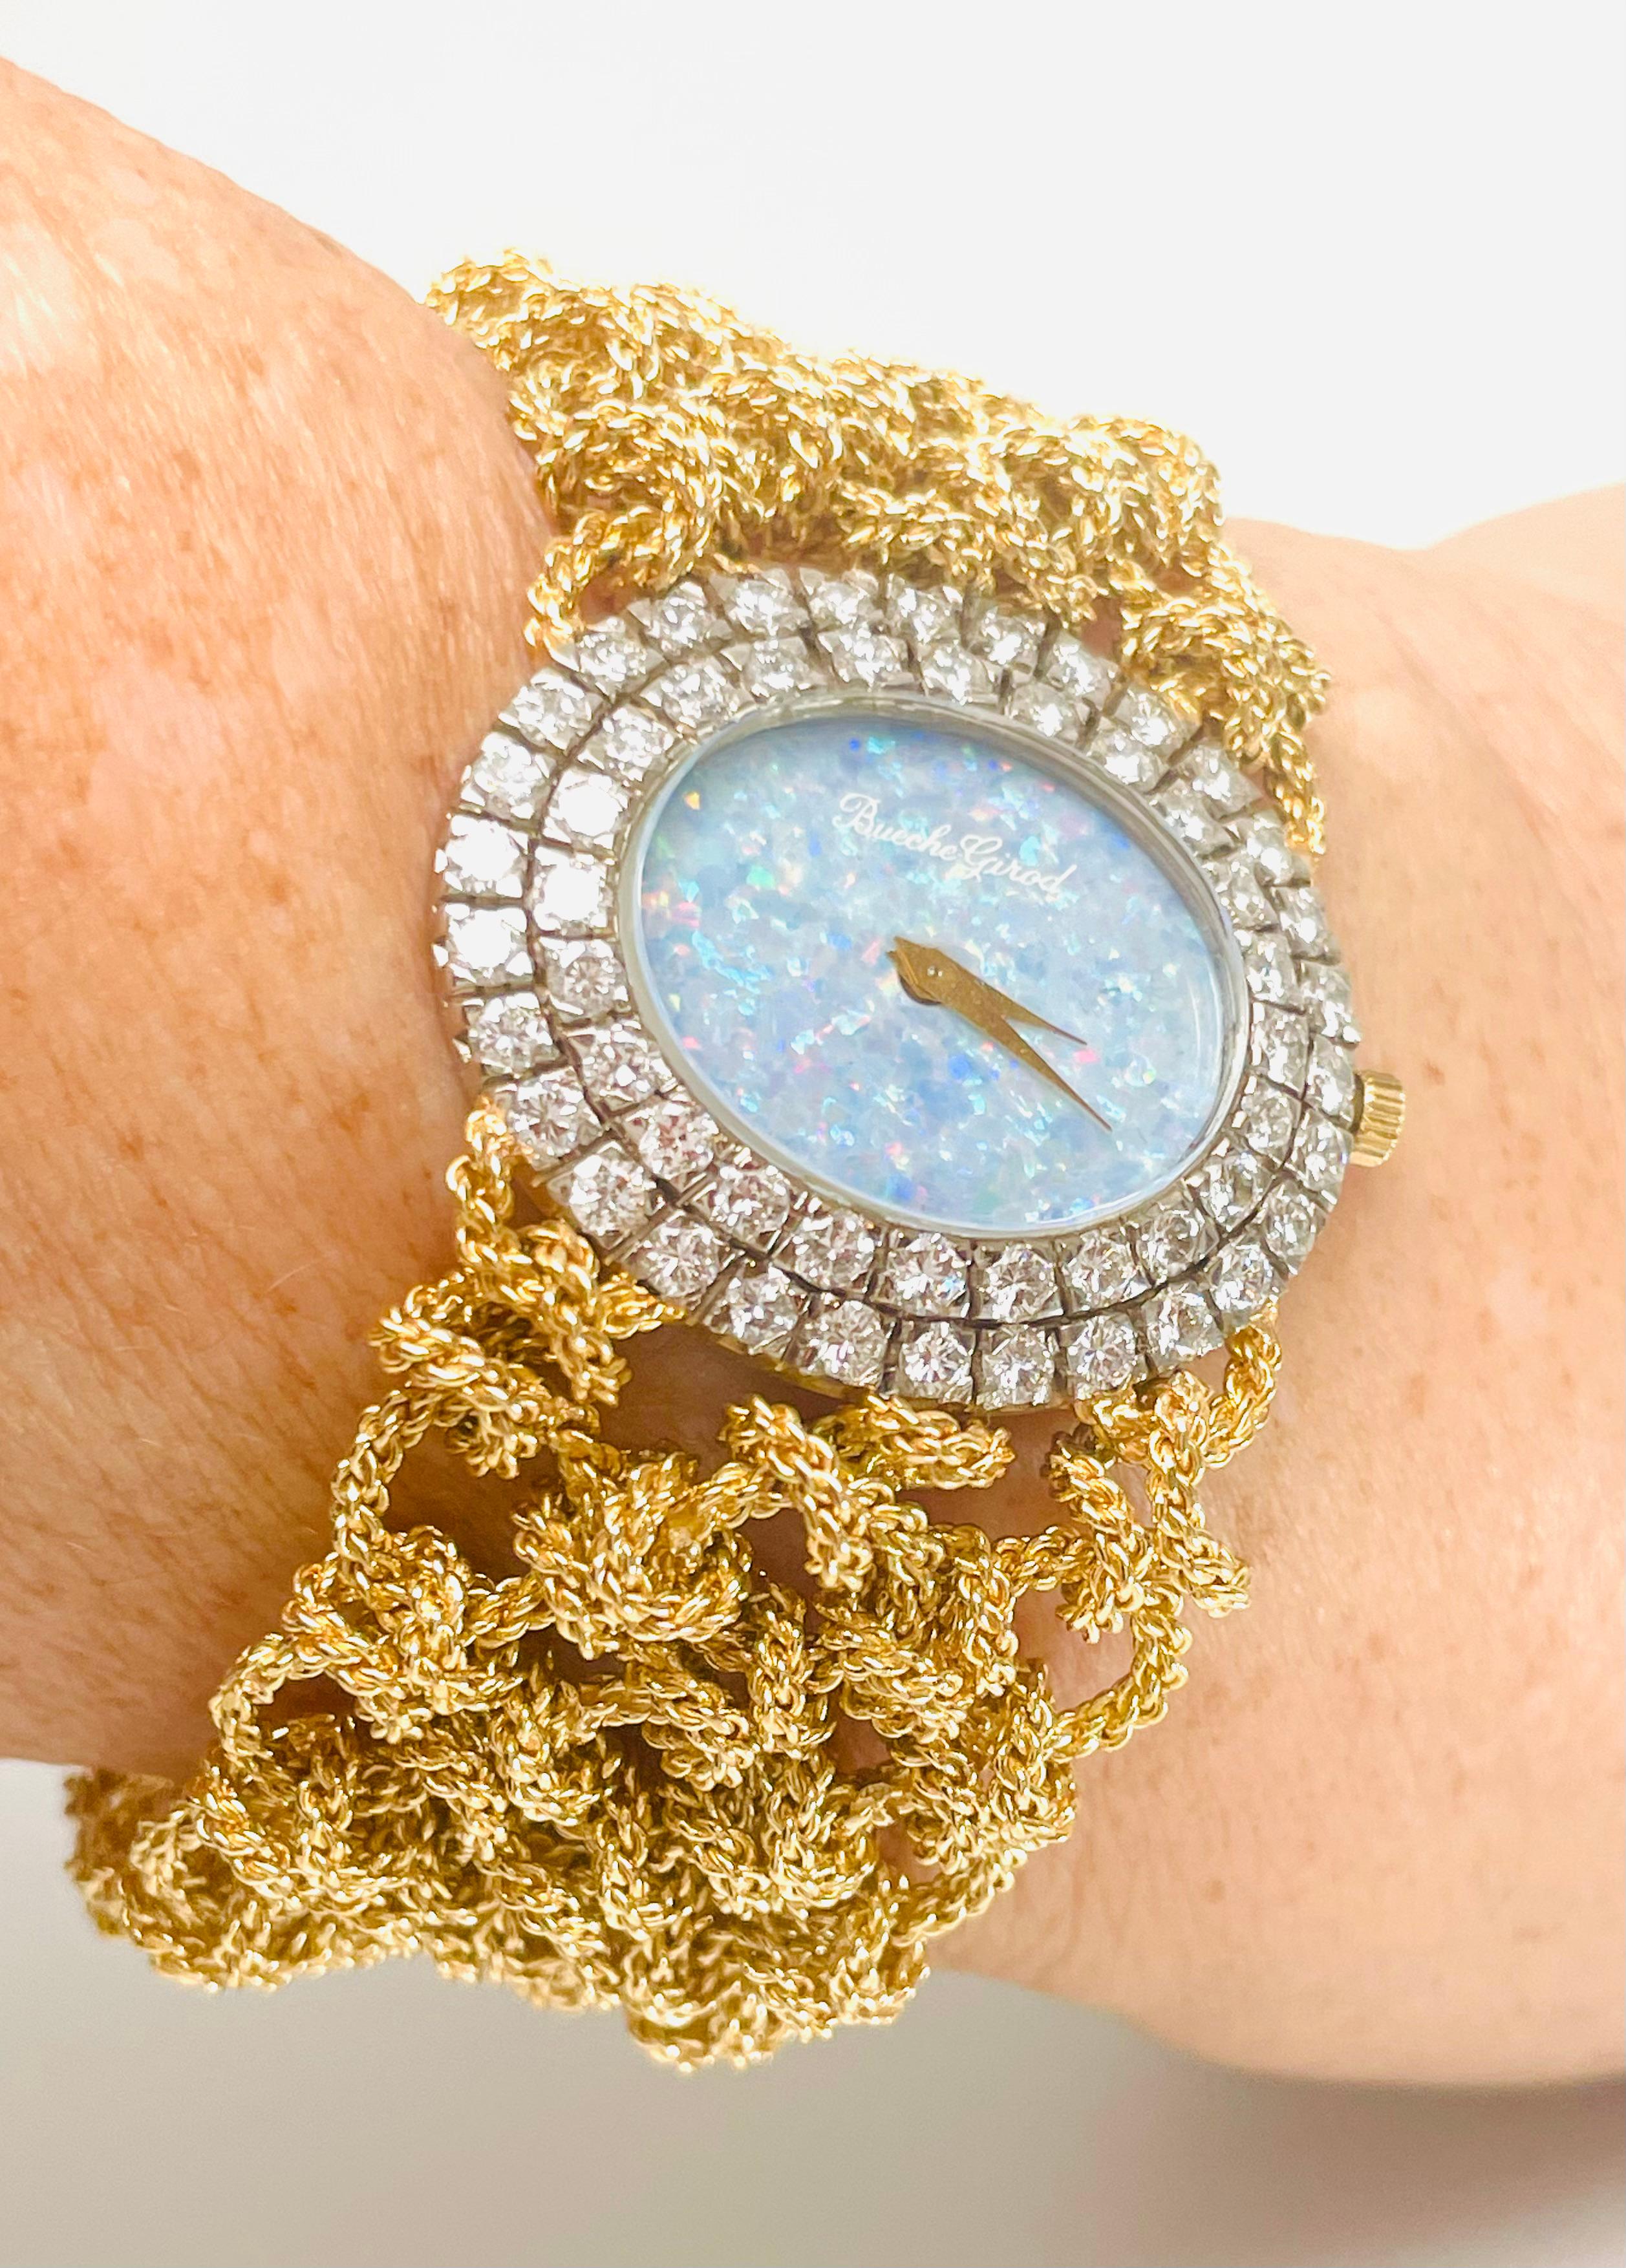 Bueche Girod Diamond, Opal, 18k Gold Watch In Excellent Condition For Sale In Huntington Woods, MI